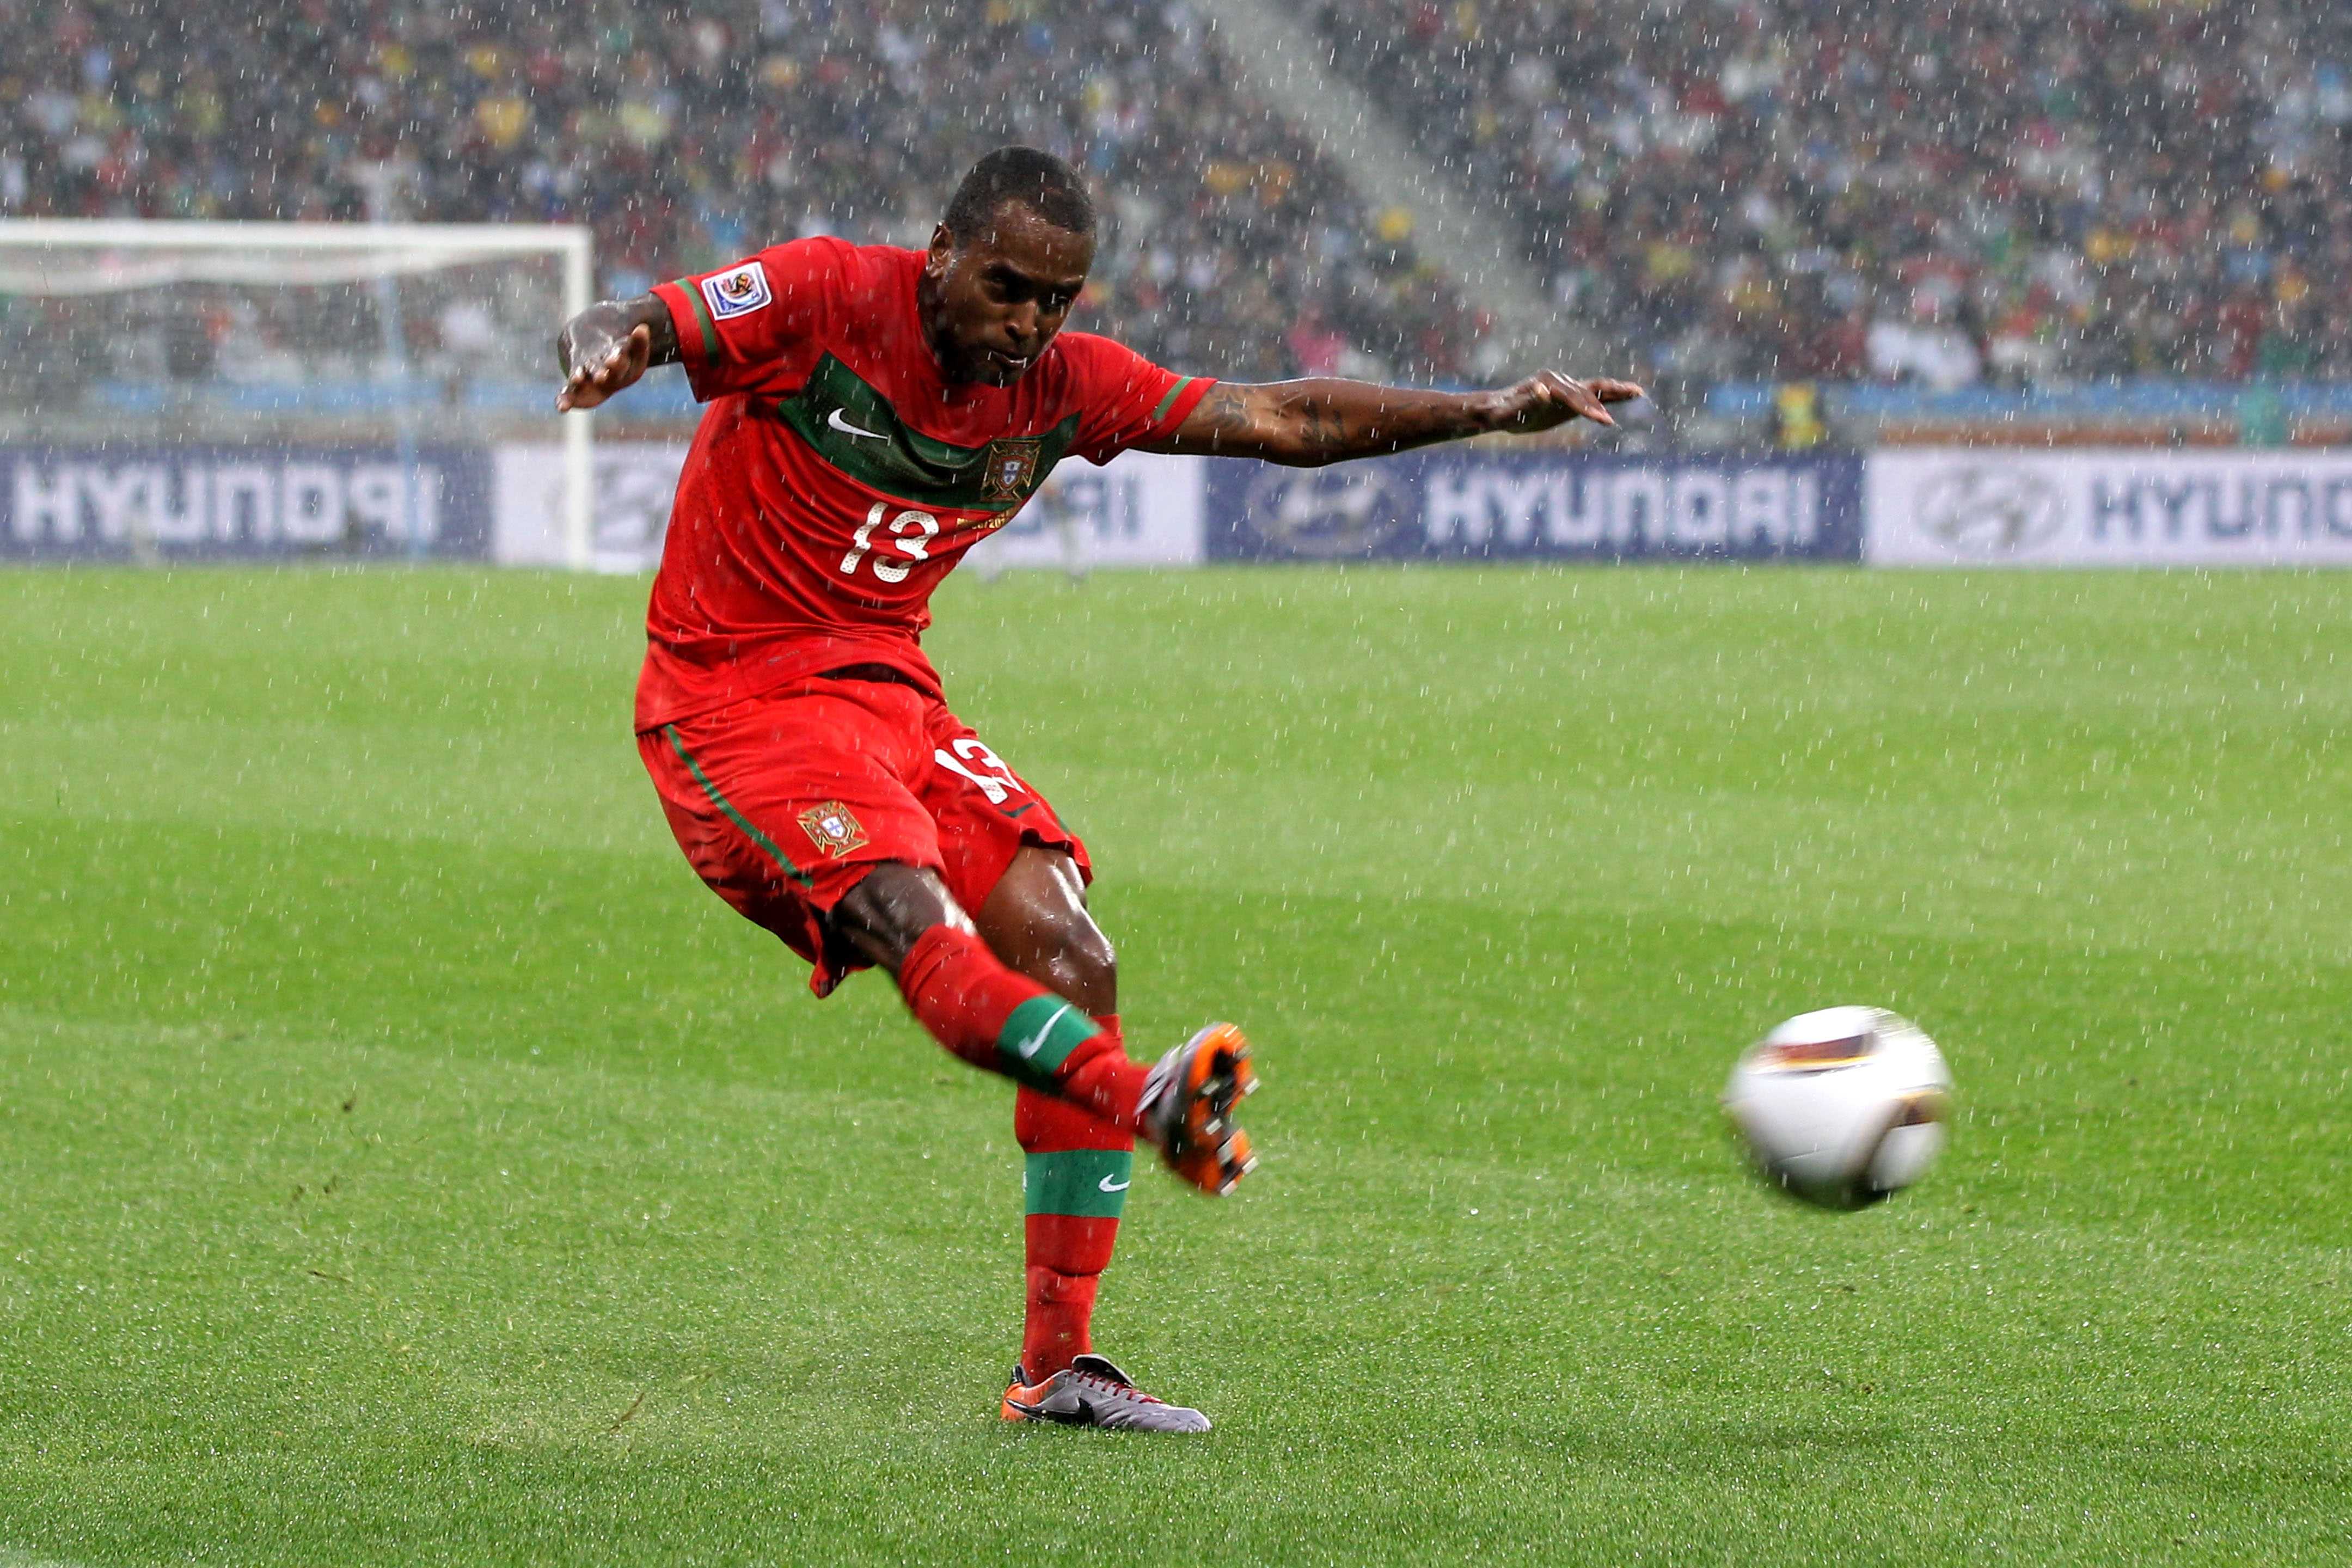 Miguel in action for Portugal against North Korea at the 2010 World Cup.